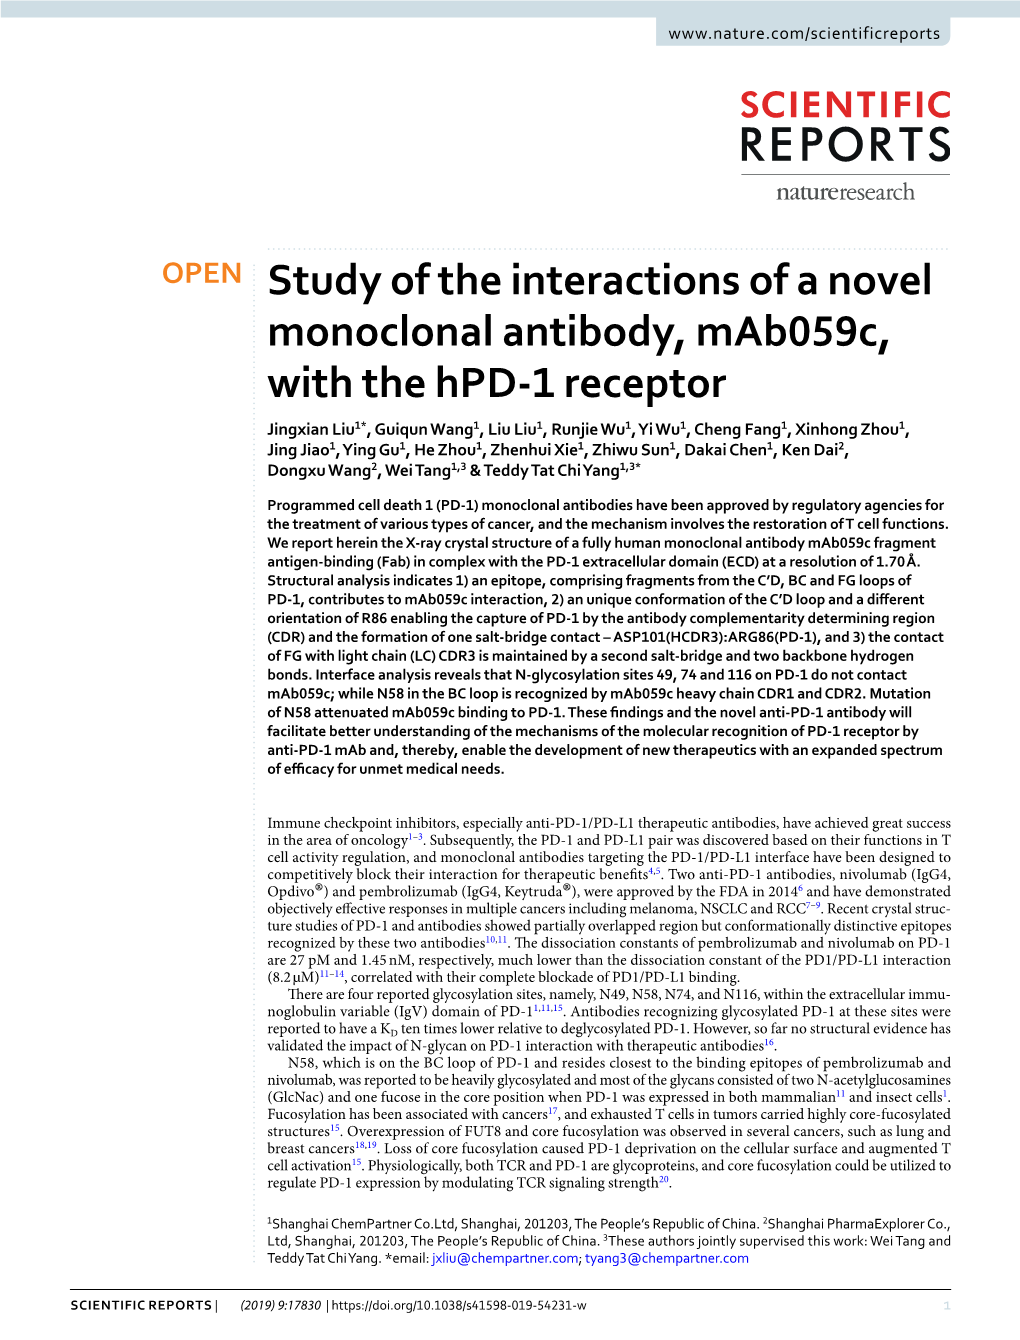 Study of the Interactions of a Novel Monoclonal Antibody, Mab059c